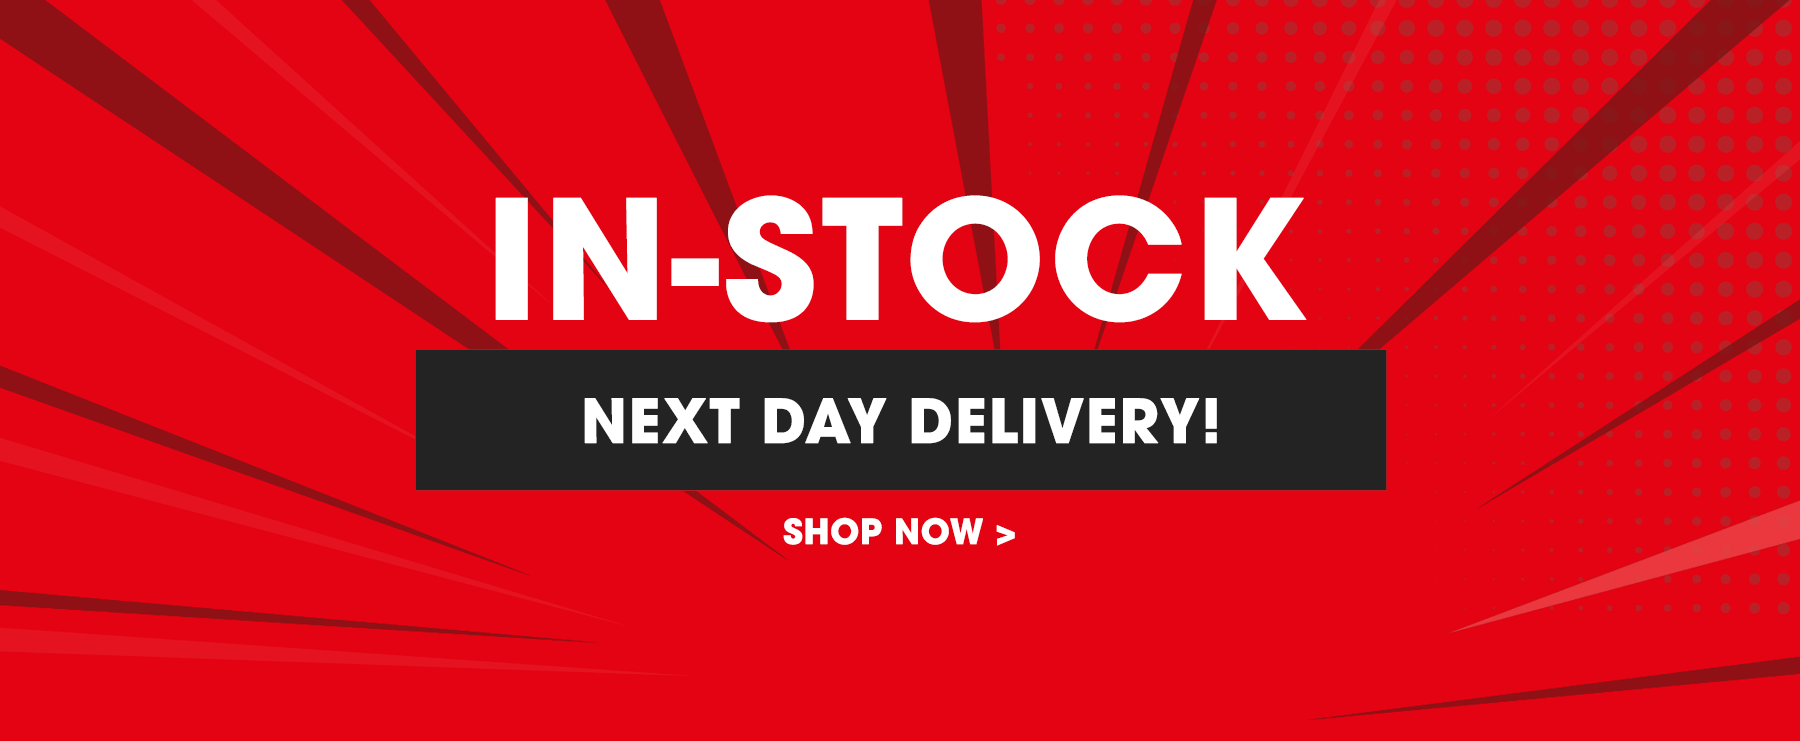 In-stock, Next Day Delivery